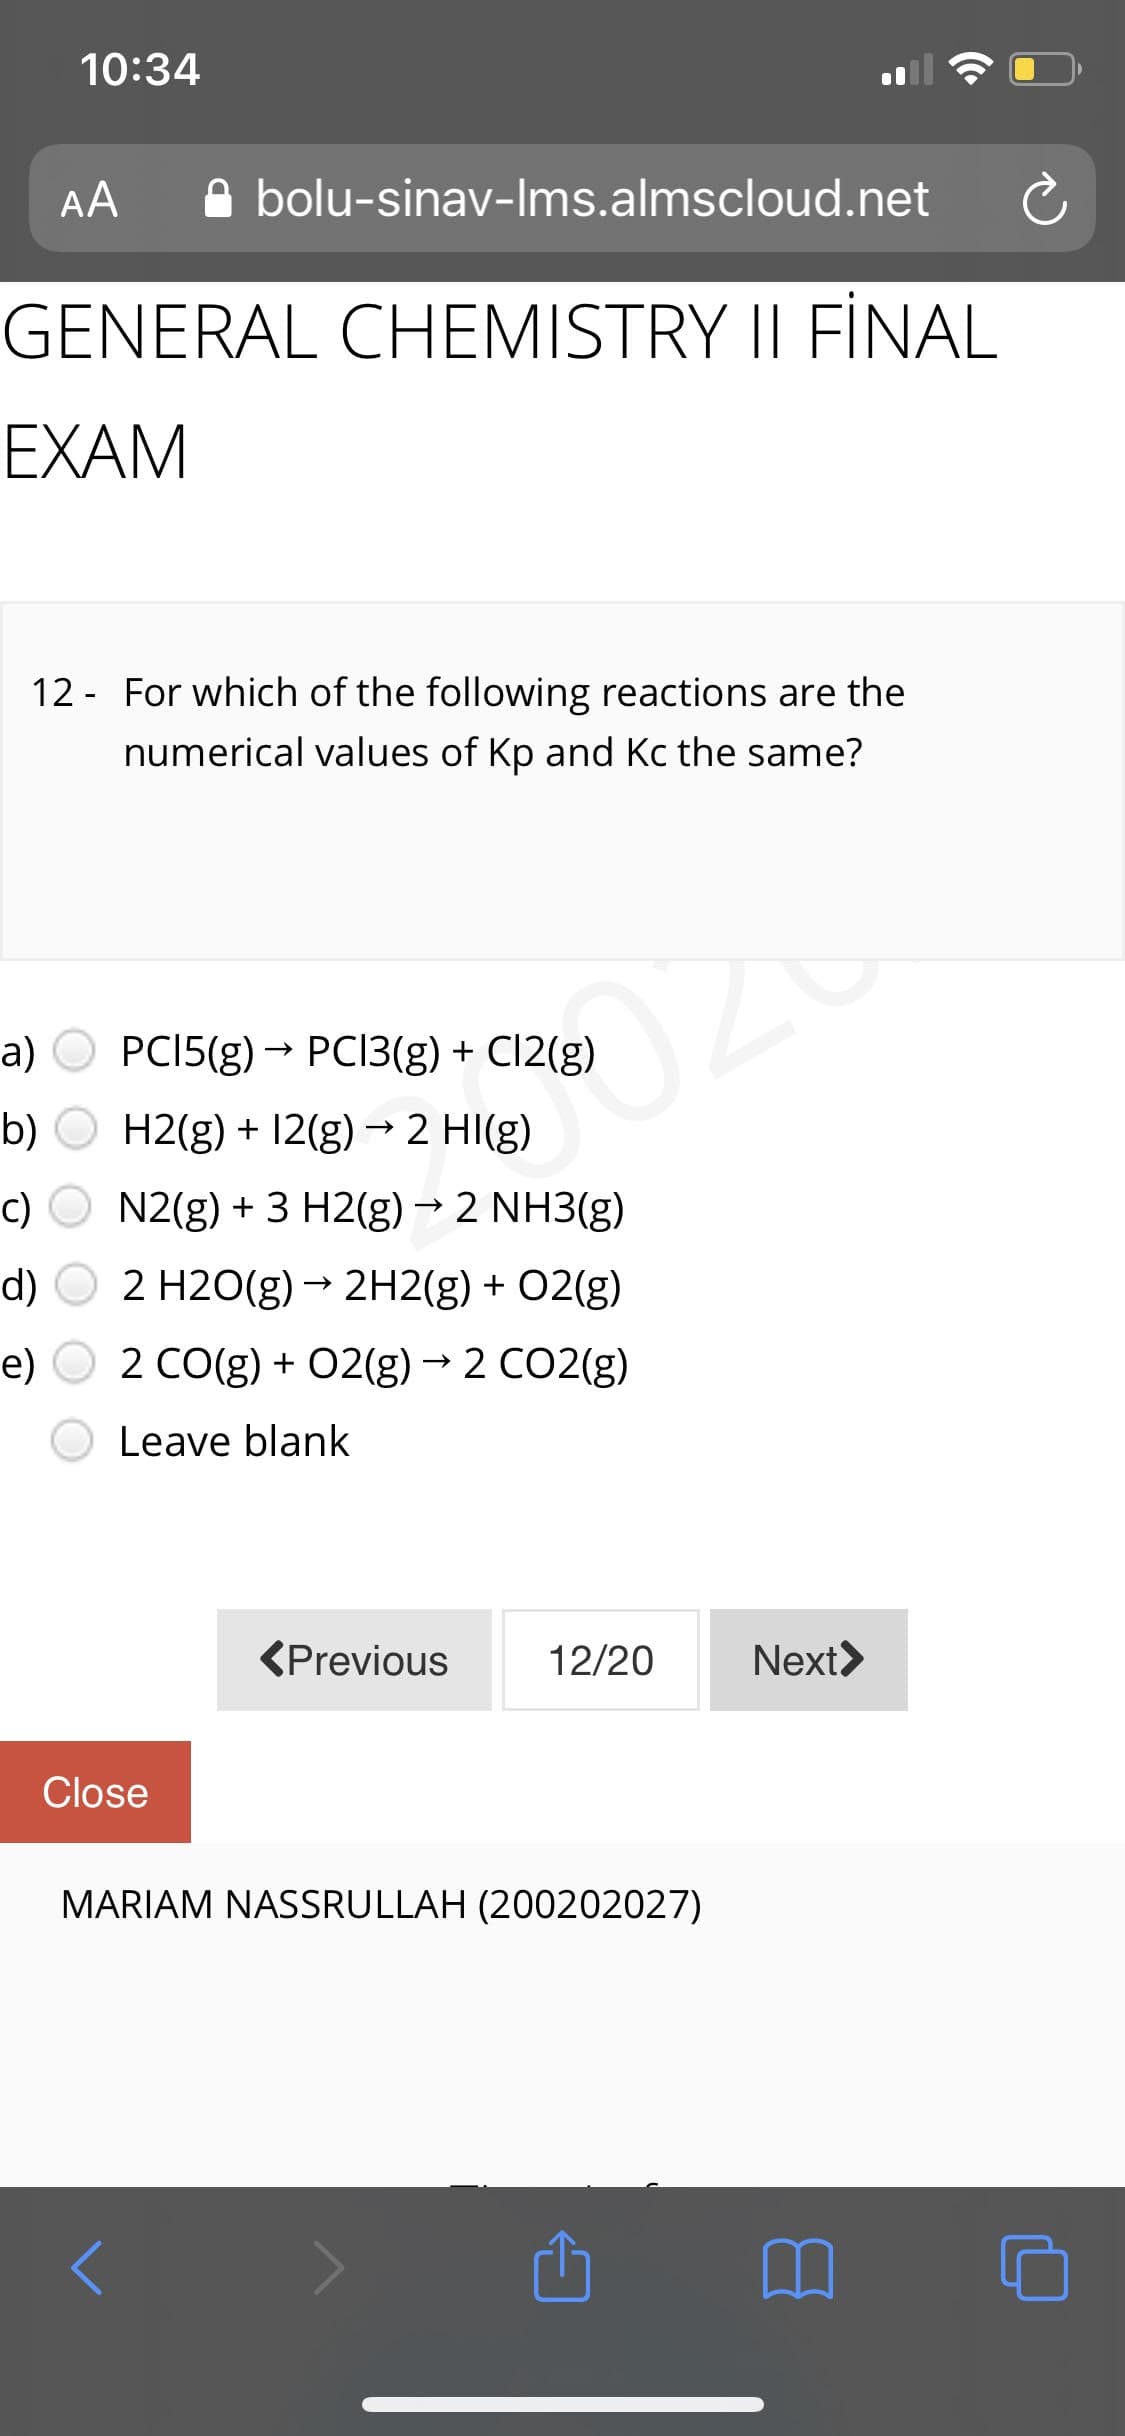 10:34
AA
A bolu-sinav-Ims.almscloud.net
GENERAL CHEMISTRY II FİNAL
EXAM
12 - For which of the following reactions are the
numerical values of Kp and Kc the same?
a)
PCI5(g) → PCI3(g) + C12(g)
->
b)
H2(g) + 12(g) → 2 HI(g)
c)
N2(g) + 3 H2(g) → 2 NH3(g)
d)
2 H2O(g) → 2H2(g) + 02(g)
e)
2 CO(g) + 02(g)→ 2 CO2(g)
Leave blank
<Previous
12/20
Next>
Close
MARIAM NASSRULLAH (200202027)
